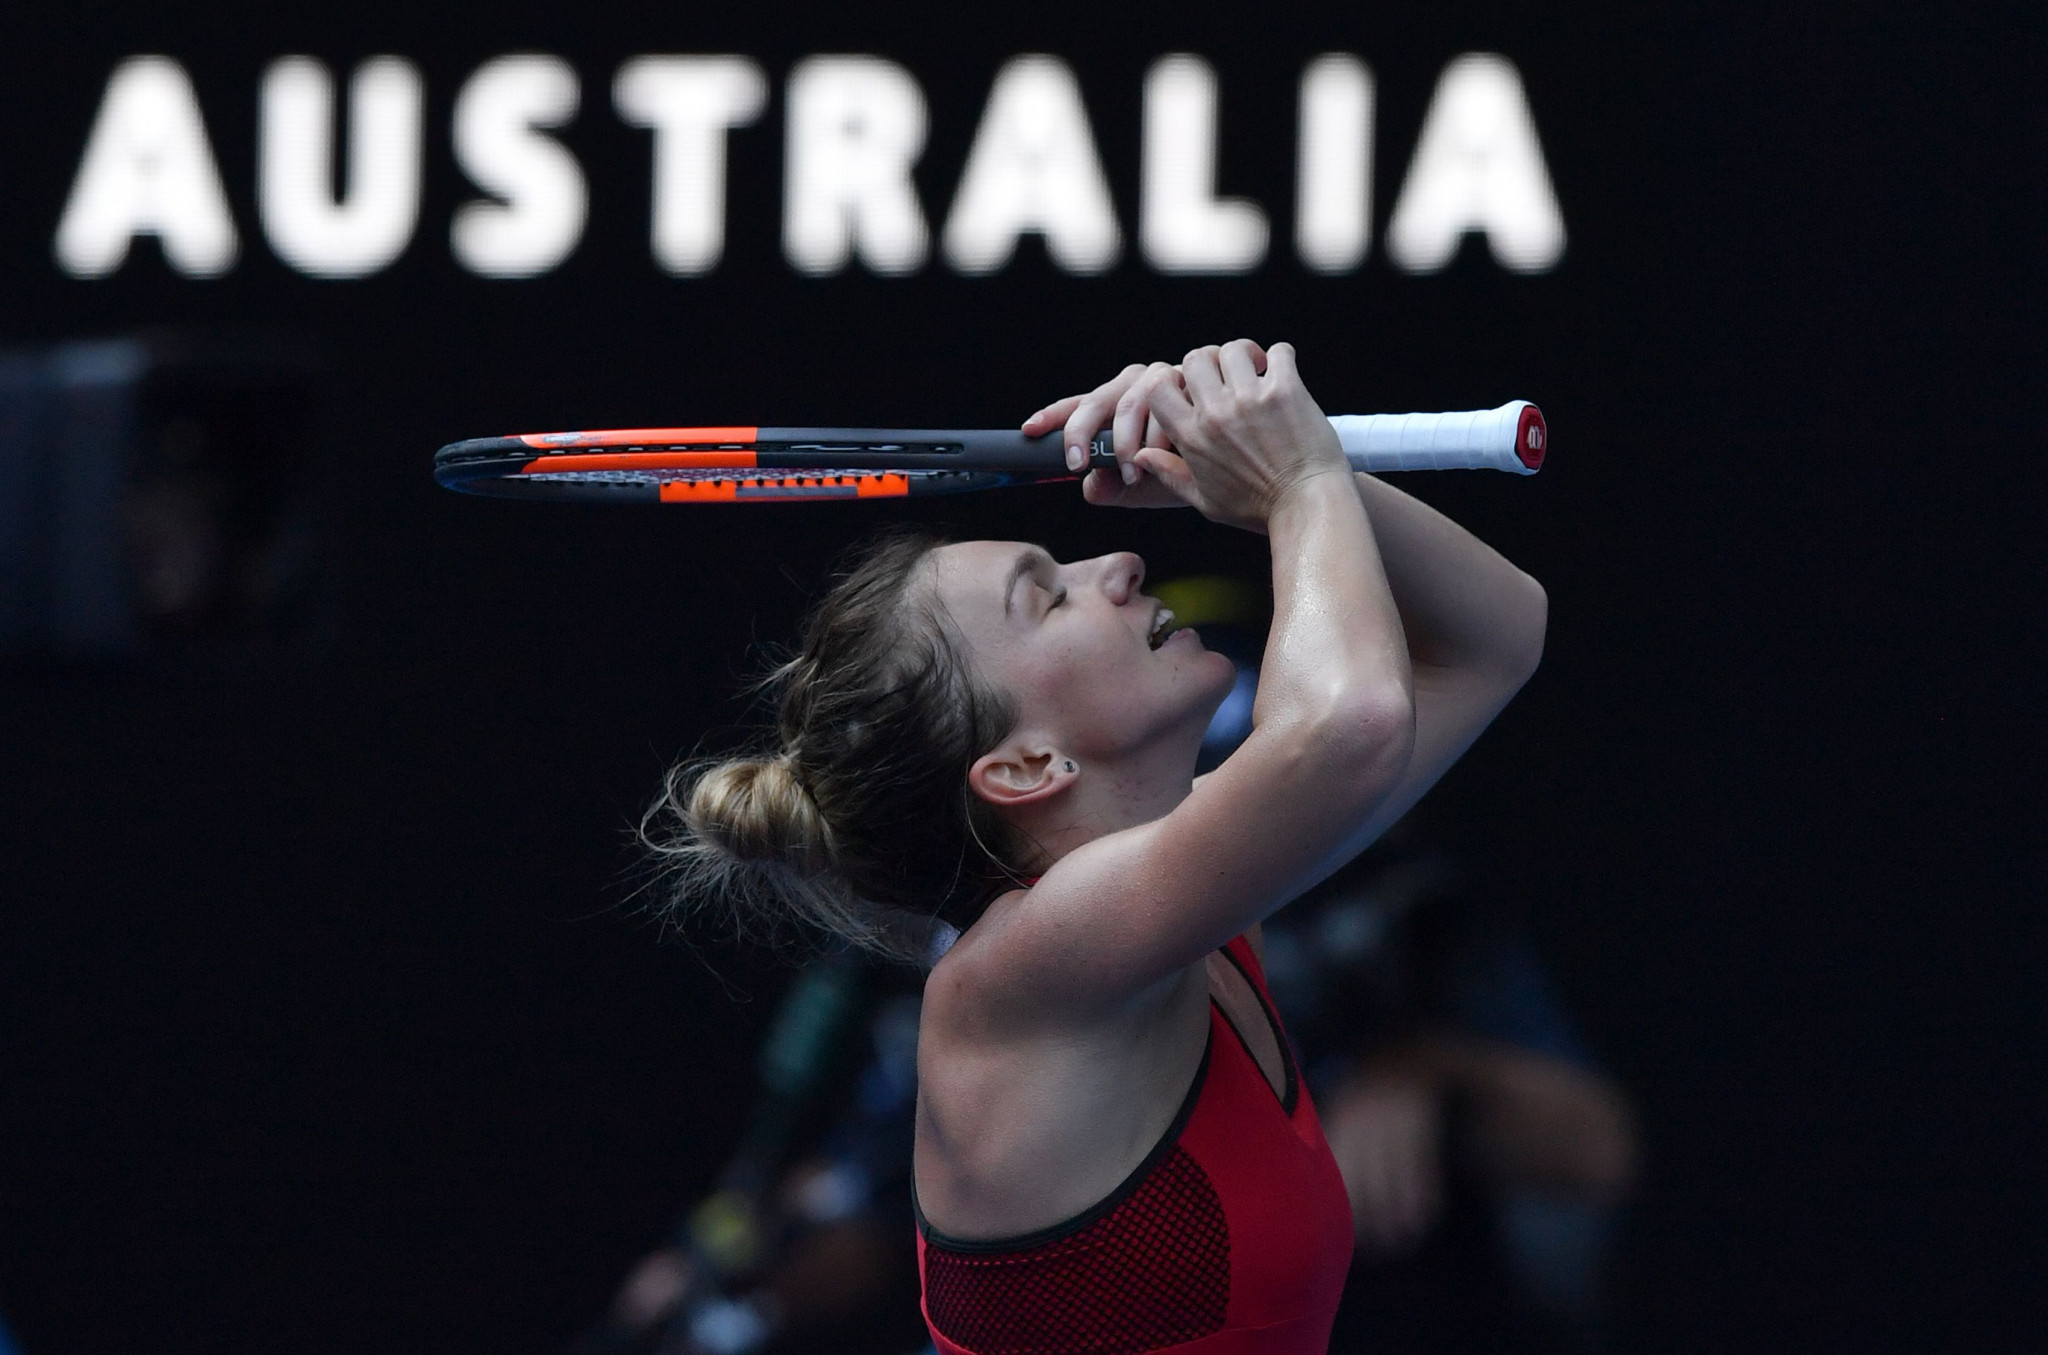 World number one Simona Halep battled through to the final of the Australian Open ©Getty Images